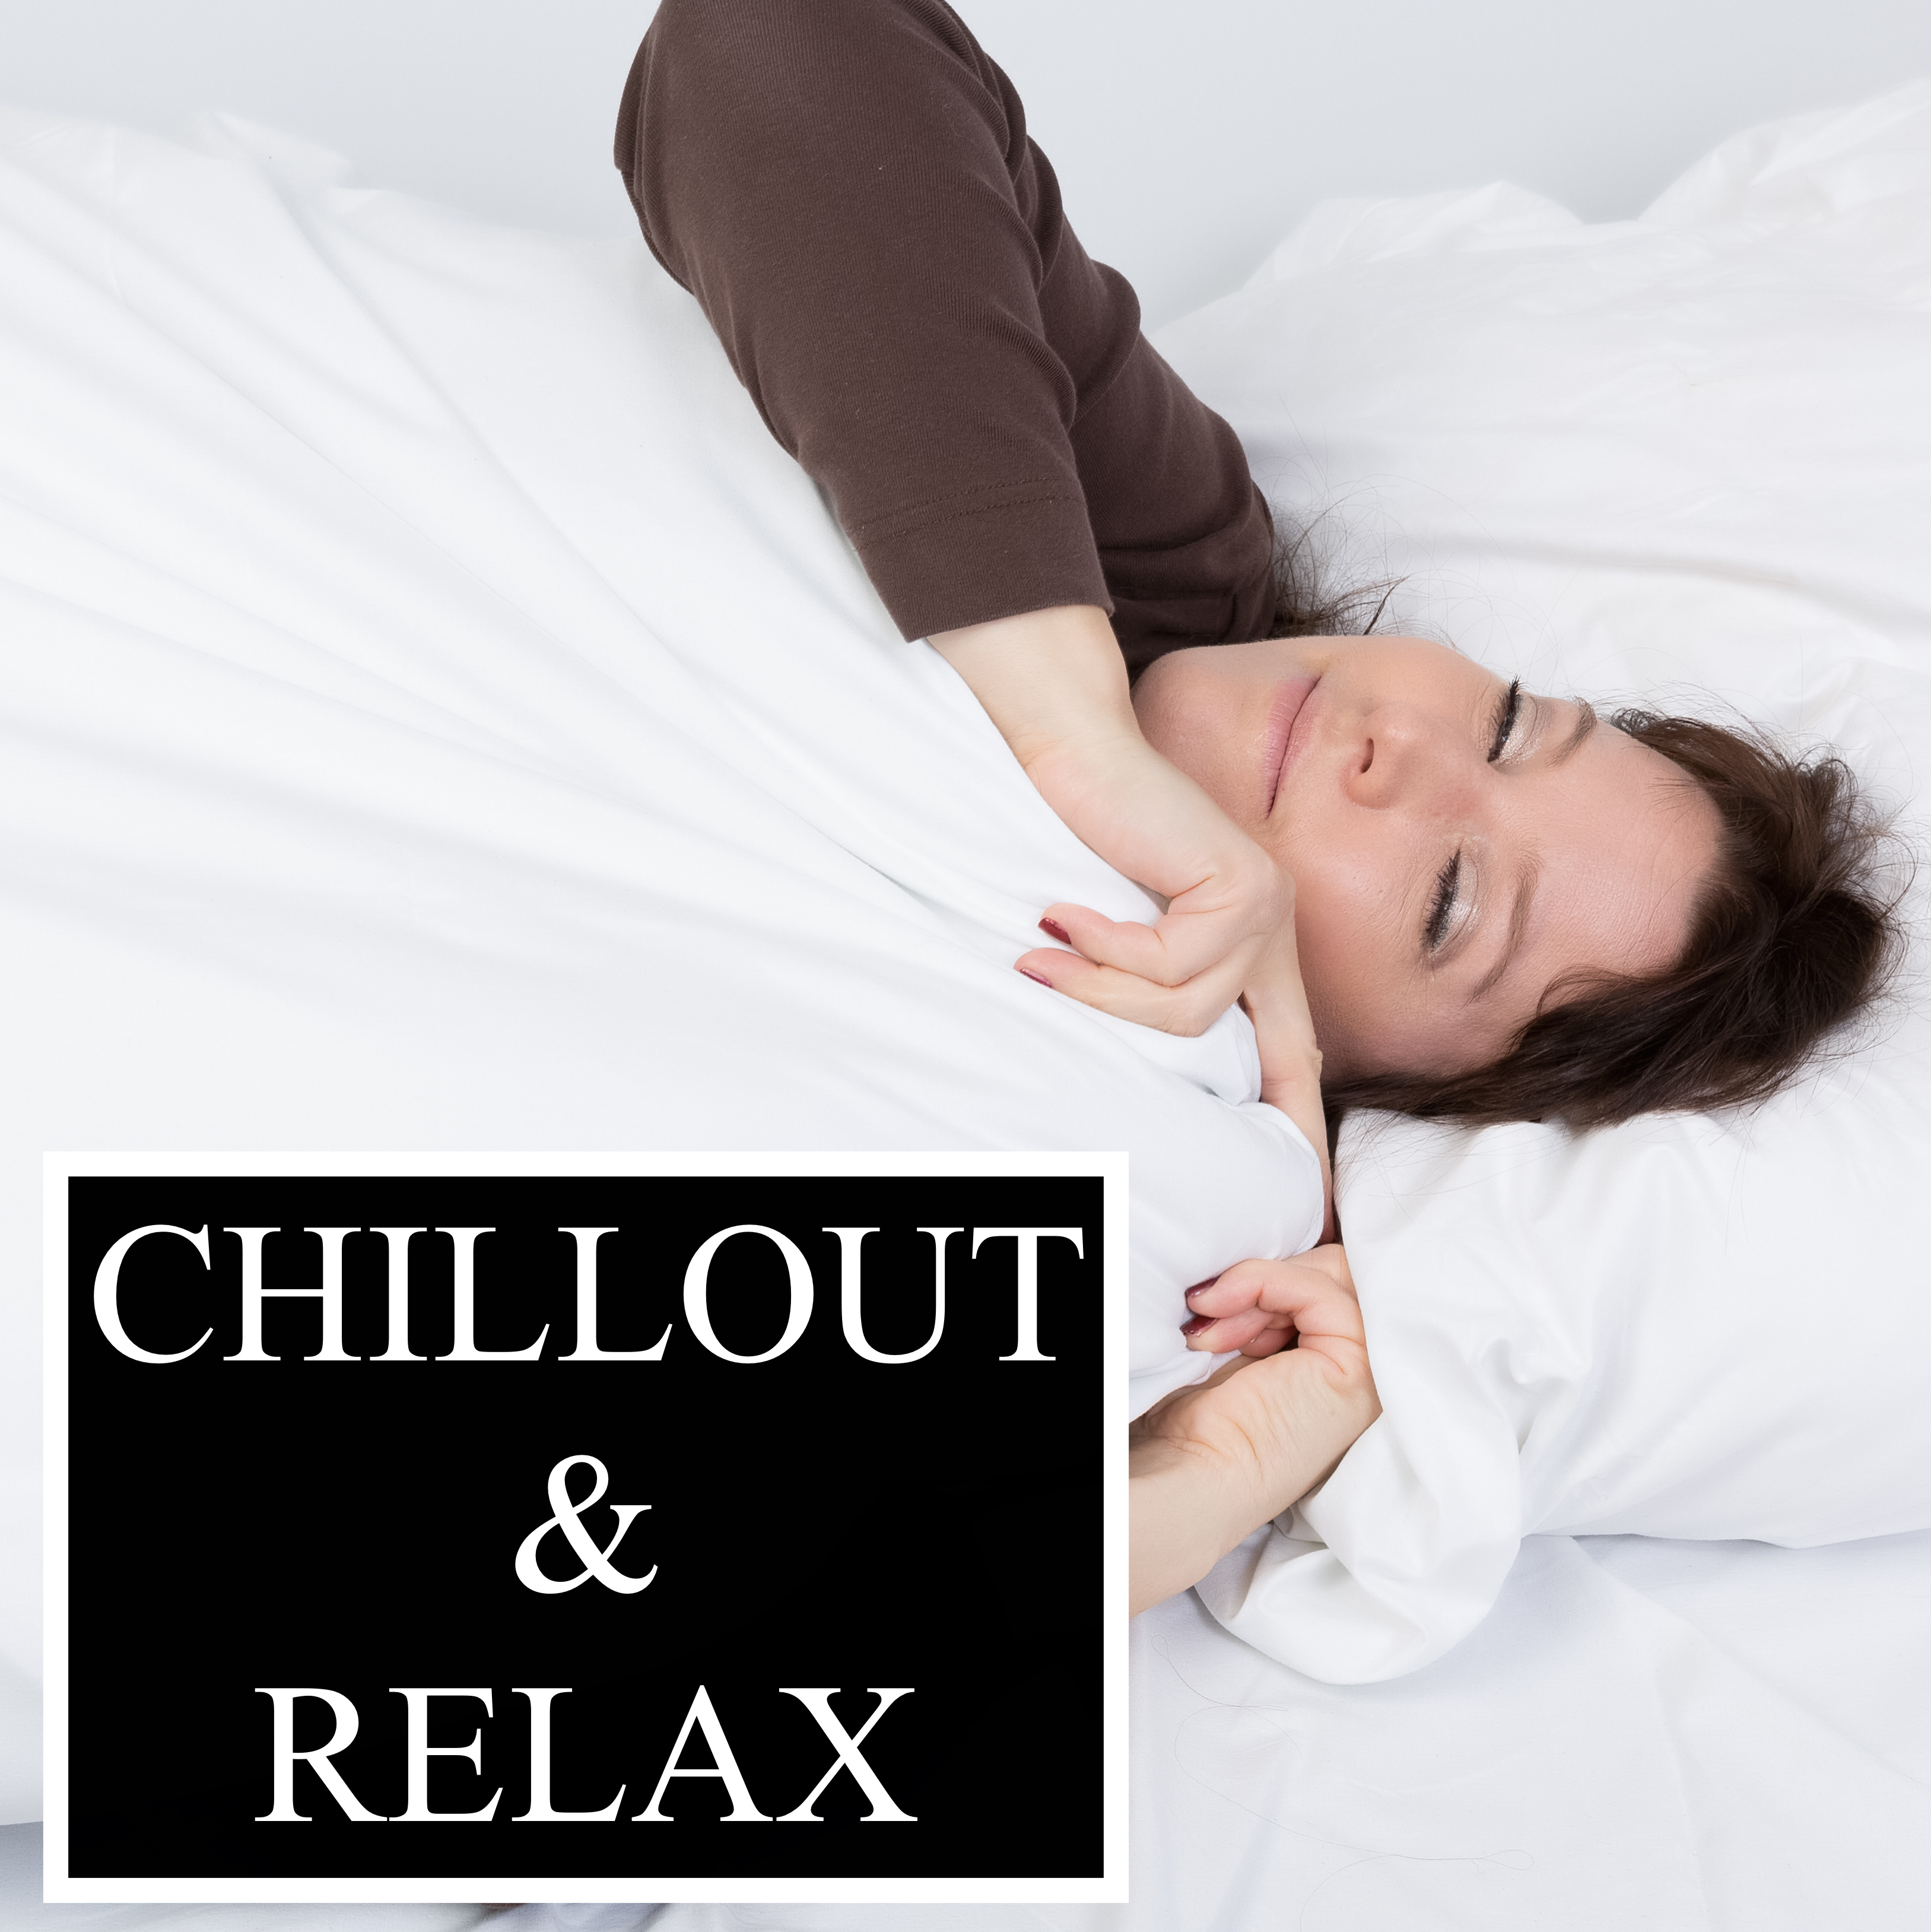 Chillout & Relax - Music to Soothe the Soul, Help with Sleep, Relieve Stress & Anxiety, Inspire Mindfulness and Stop Negative Thoughts